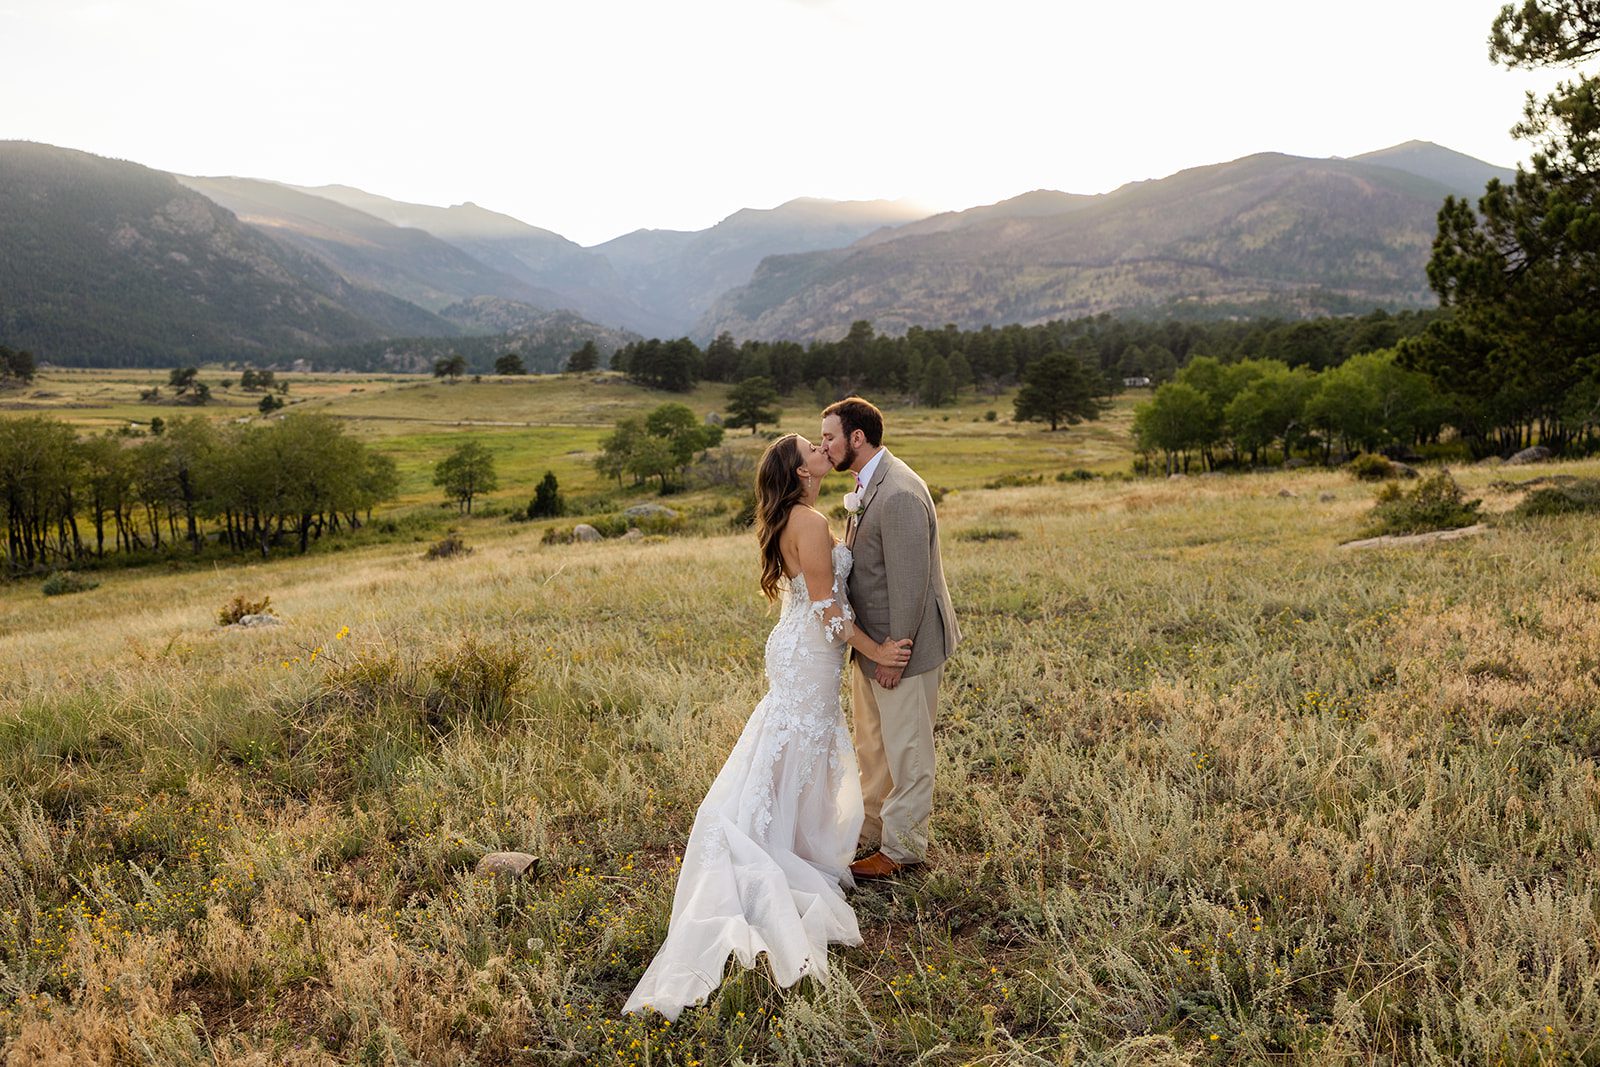 The bride and groom kiss at sunset in the valley. 